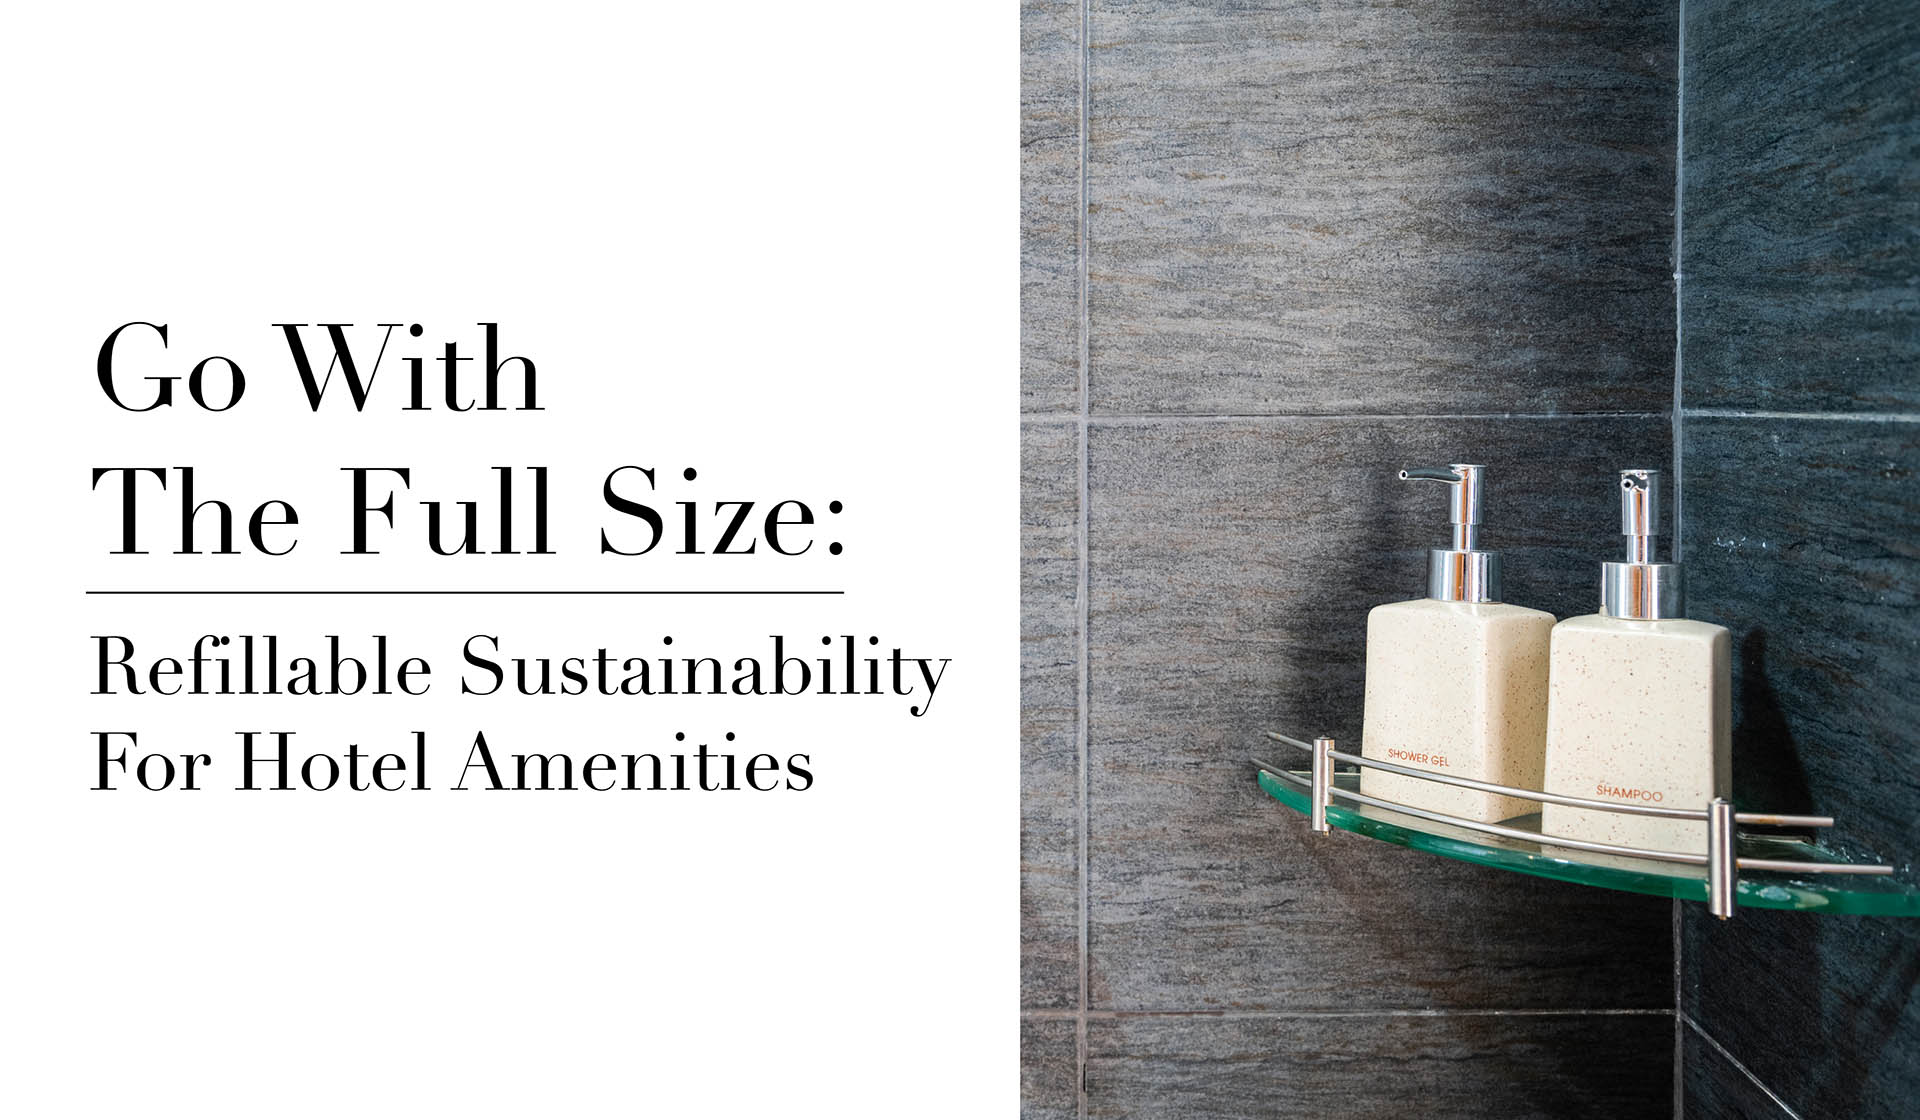 Go With The Full Size: Refillable Sustainability For Hotel Amenities